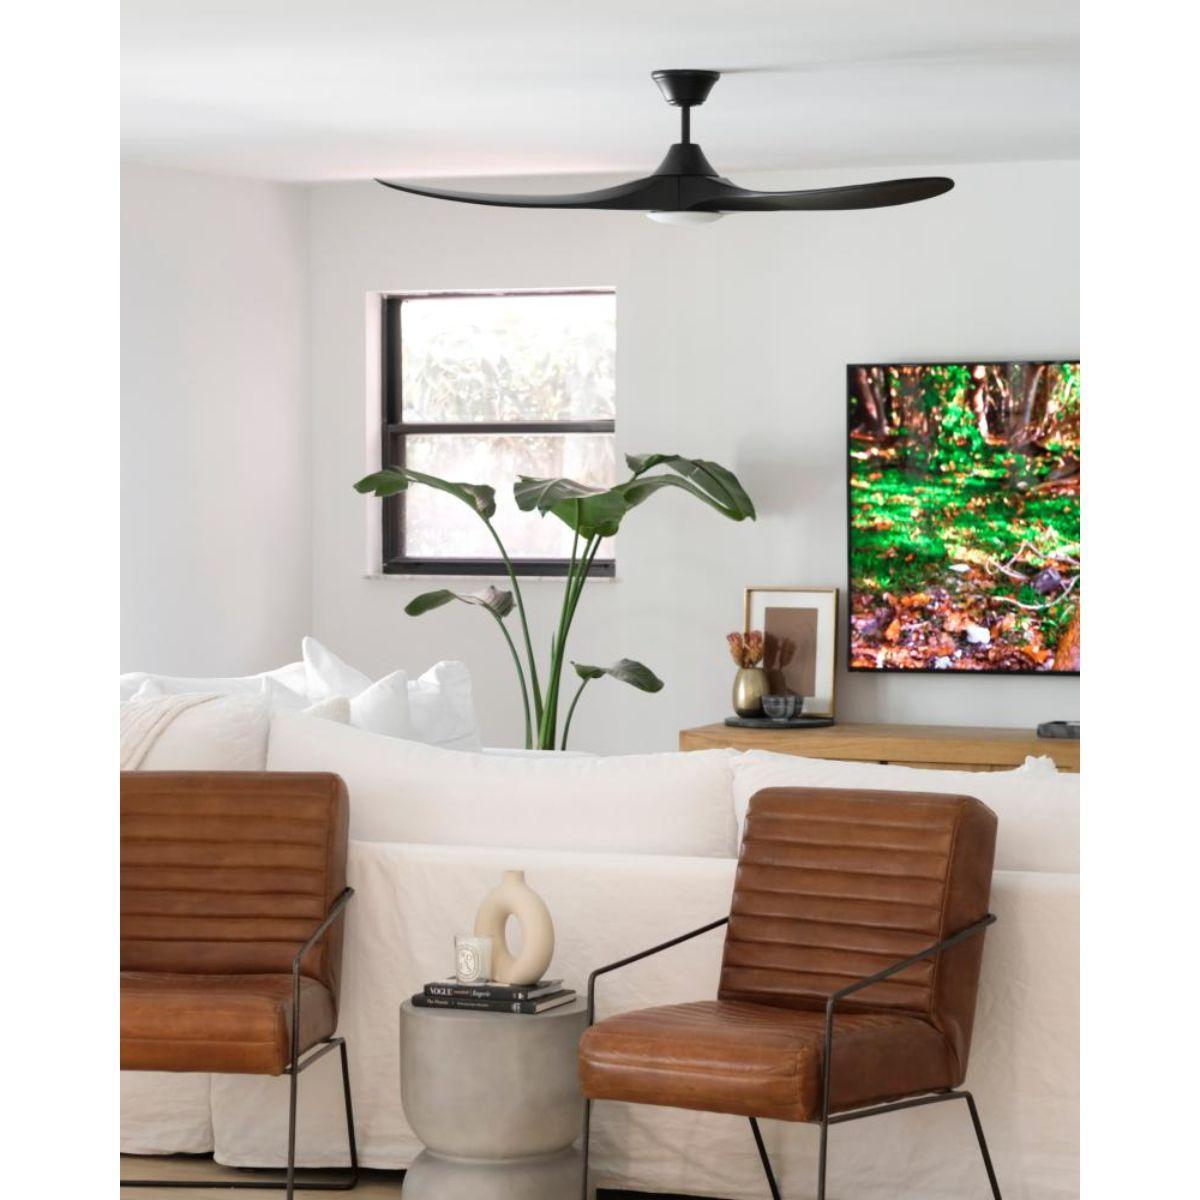 Maverick 60 Inch LED Modern Outdoor Ceiling Fan With Light And Remote - Bees Lighting